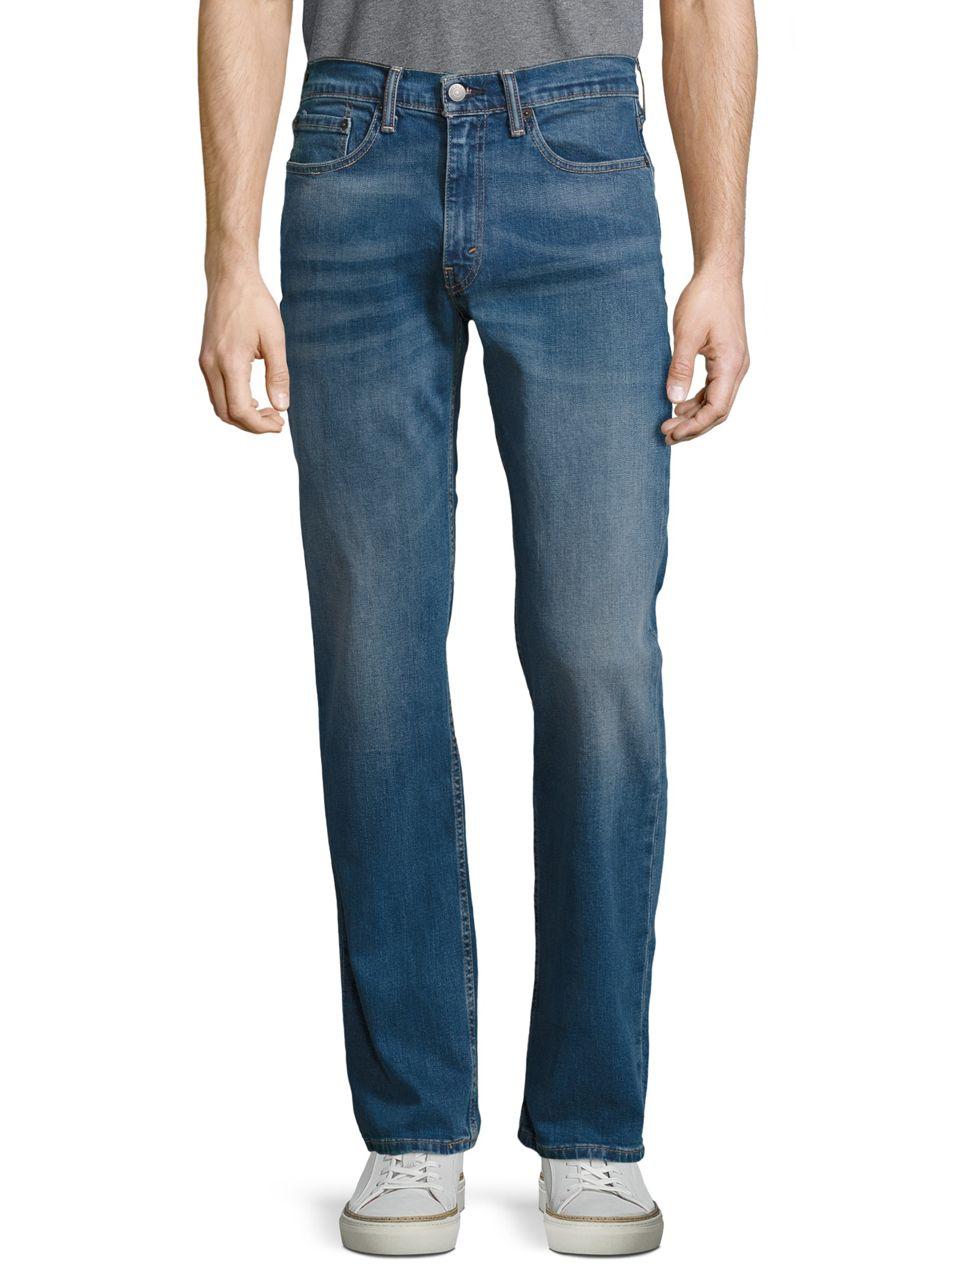 Lyst - Levi's 514 Stretch Jeans in Blue for Men